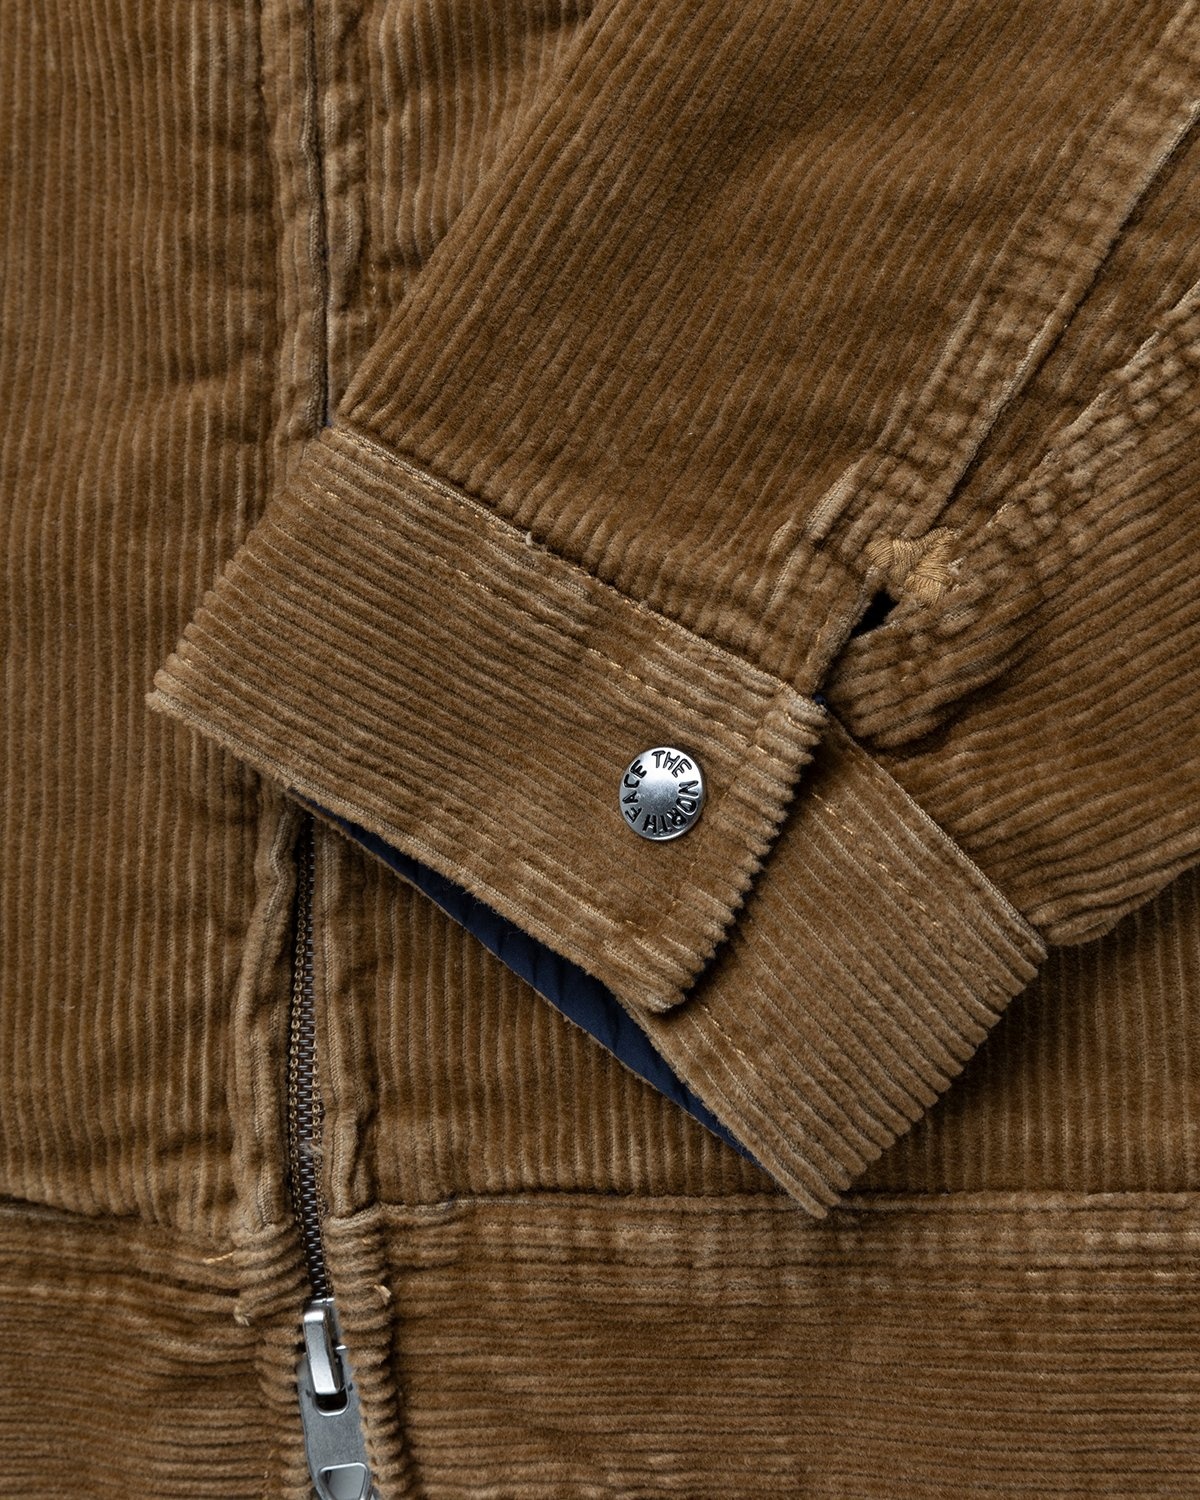 The North Face – Trucker Jacket Utility Brown - Denim Jackets - Brown - Image 5